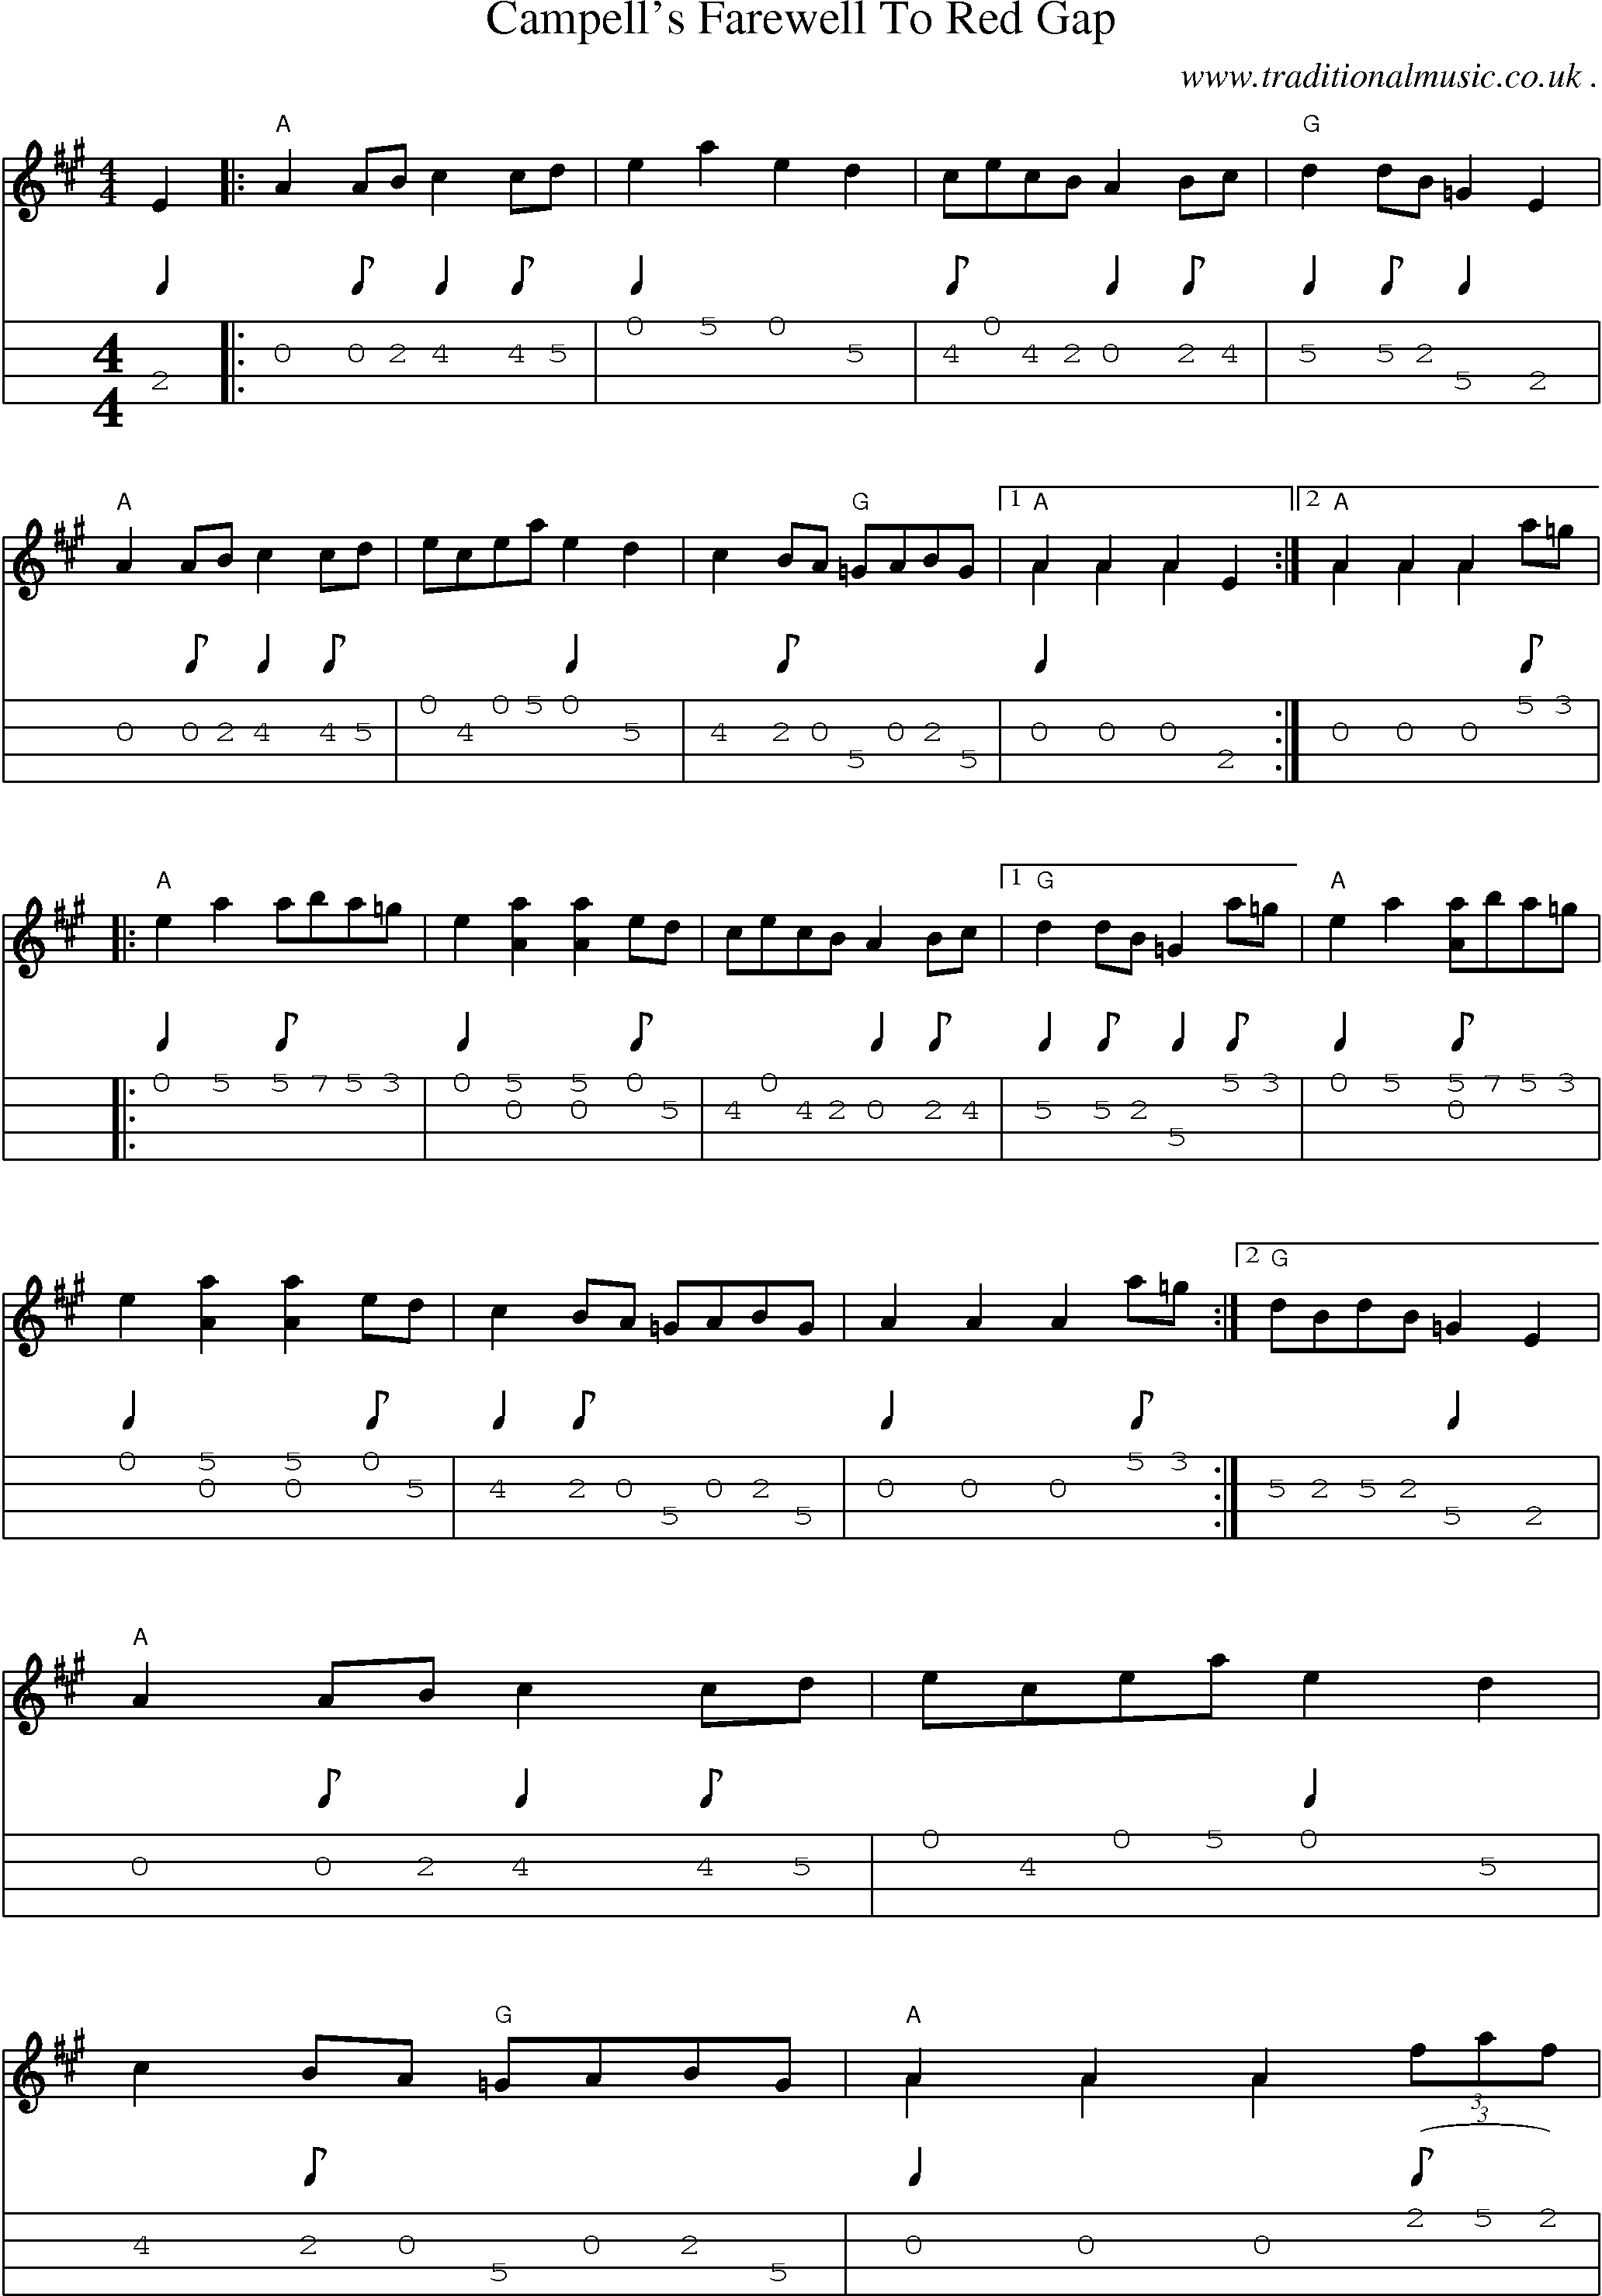 Music Score and Mandolin Tabs for Campells Farewell To Red Gap